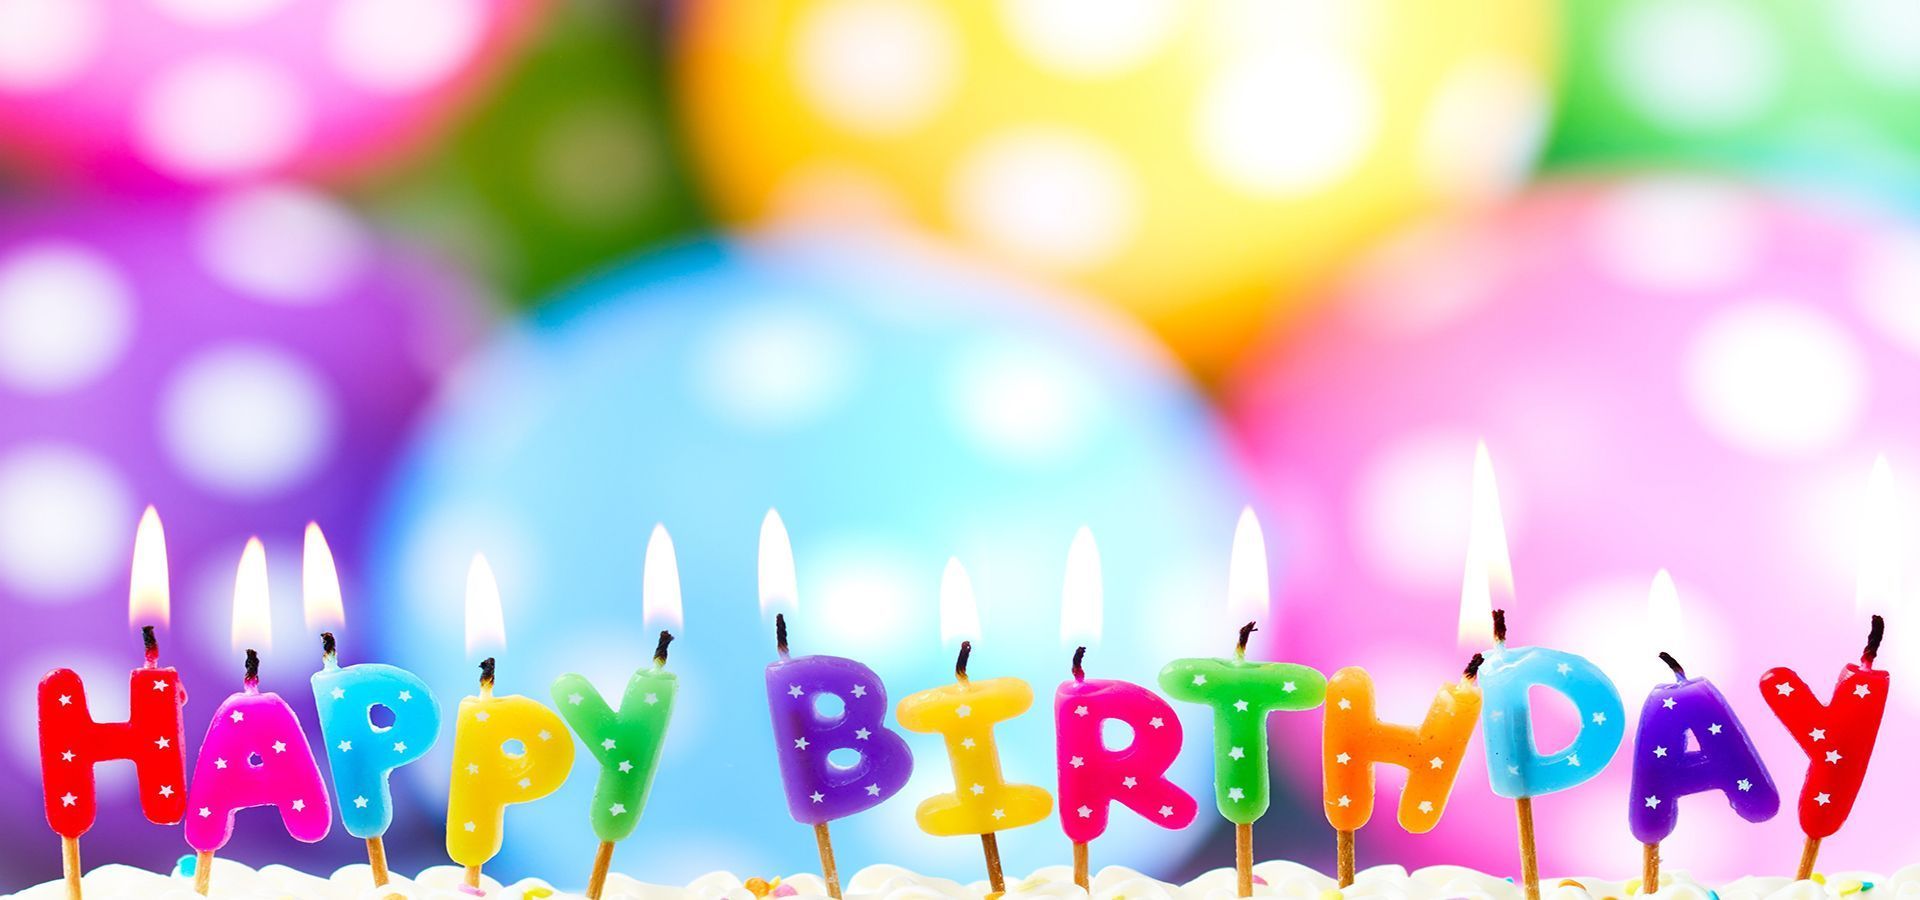 Colorful Birthday Wallpapers - 4k, HD Colorful Birthday Backgrounds on ...